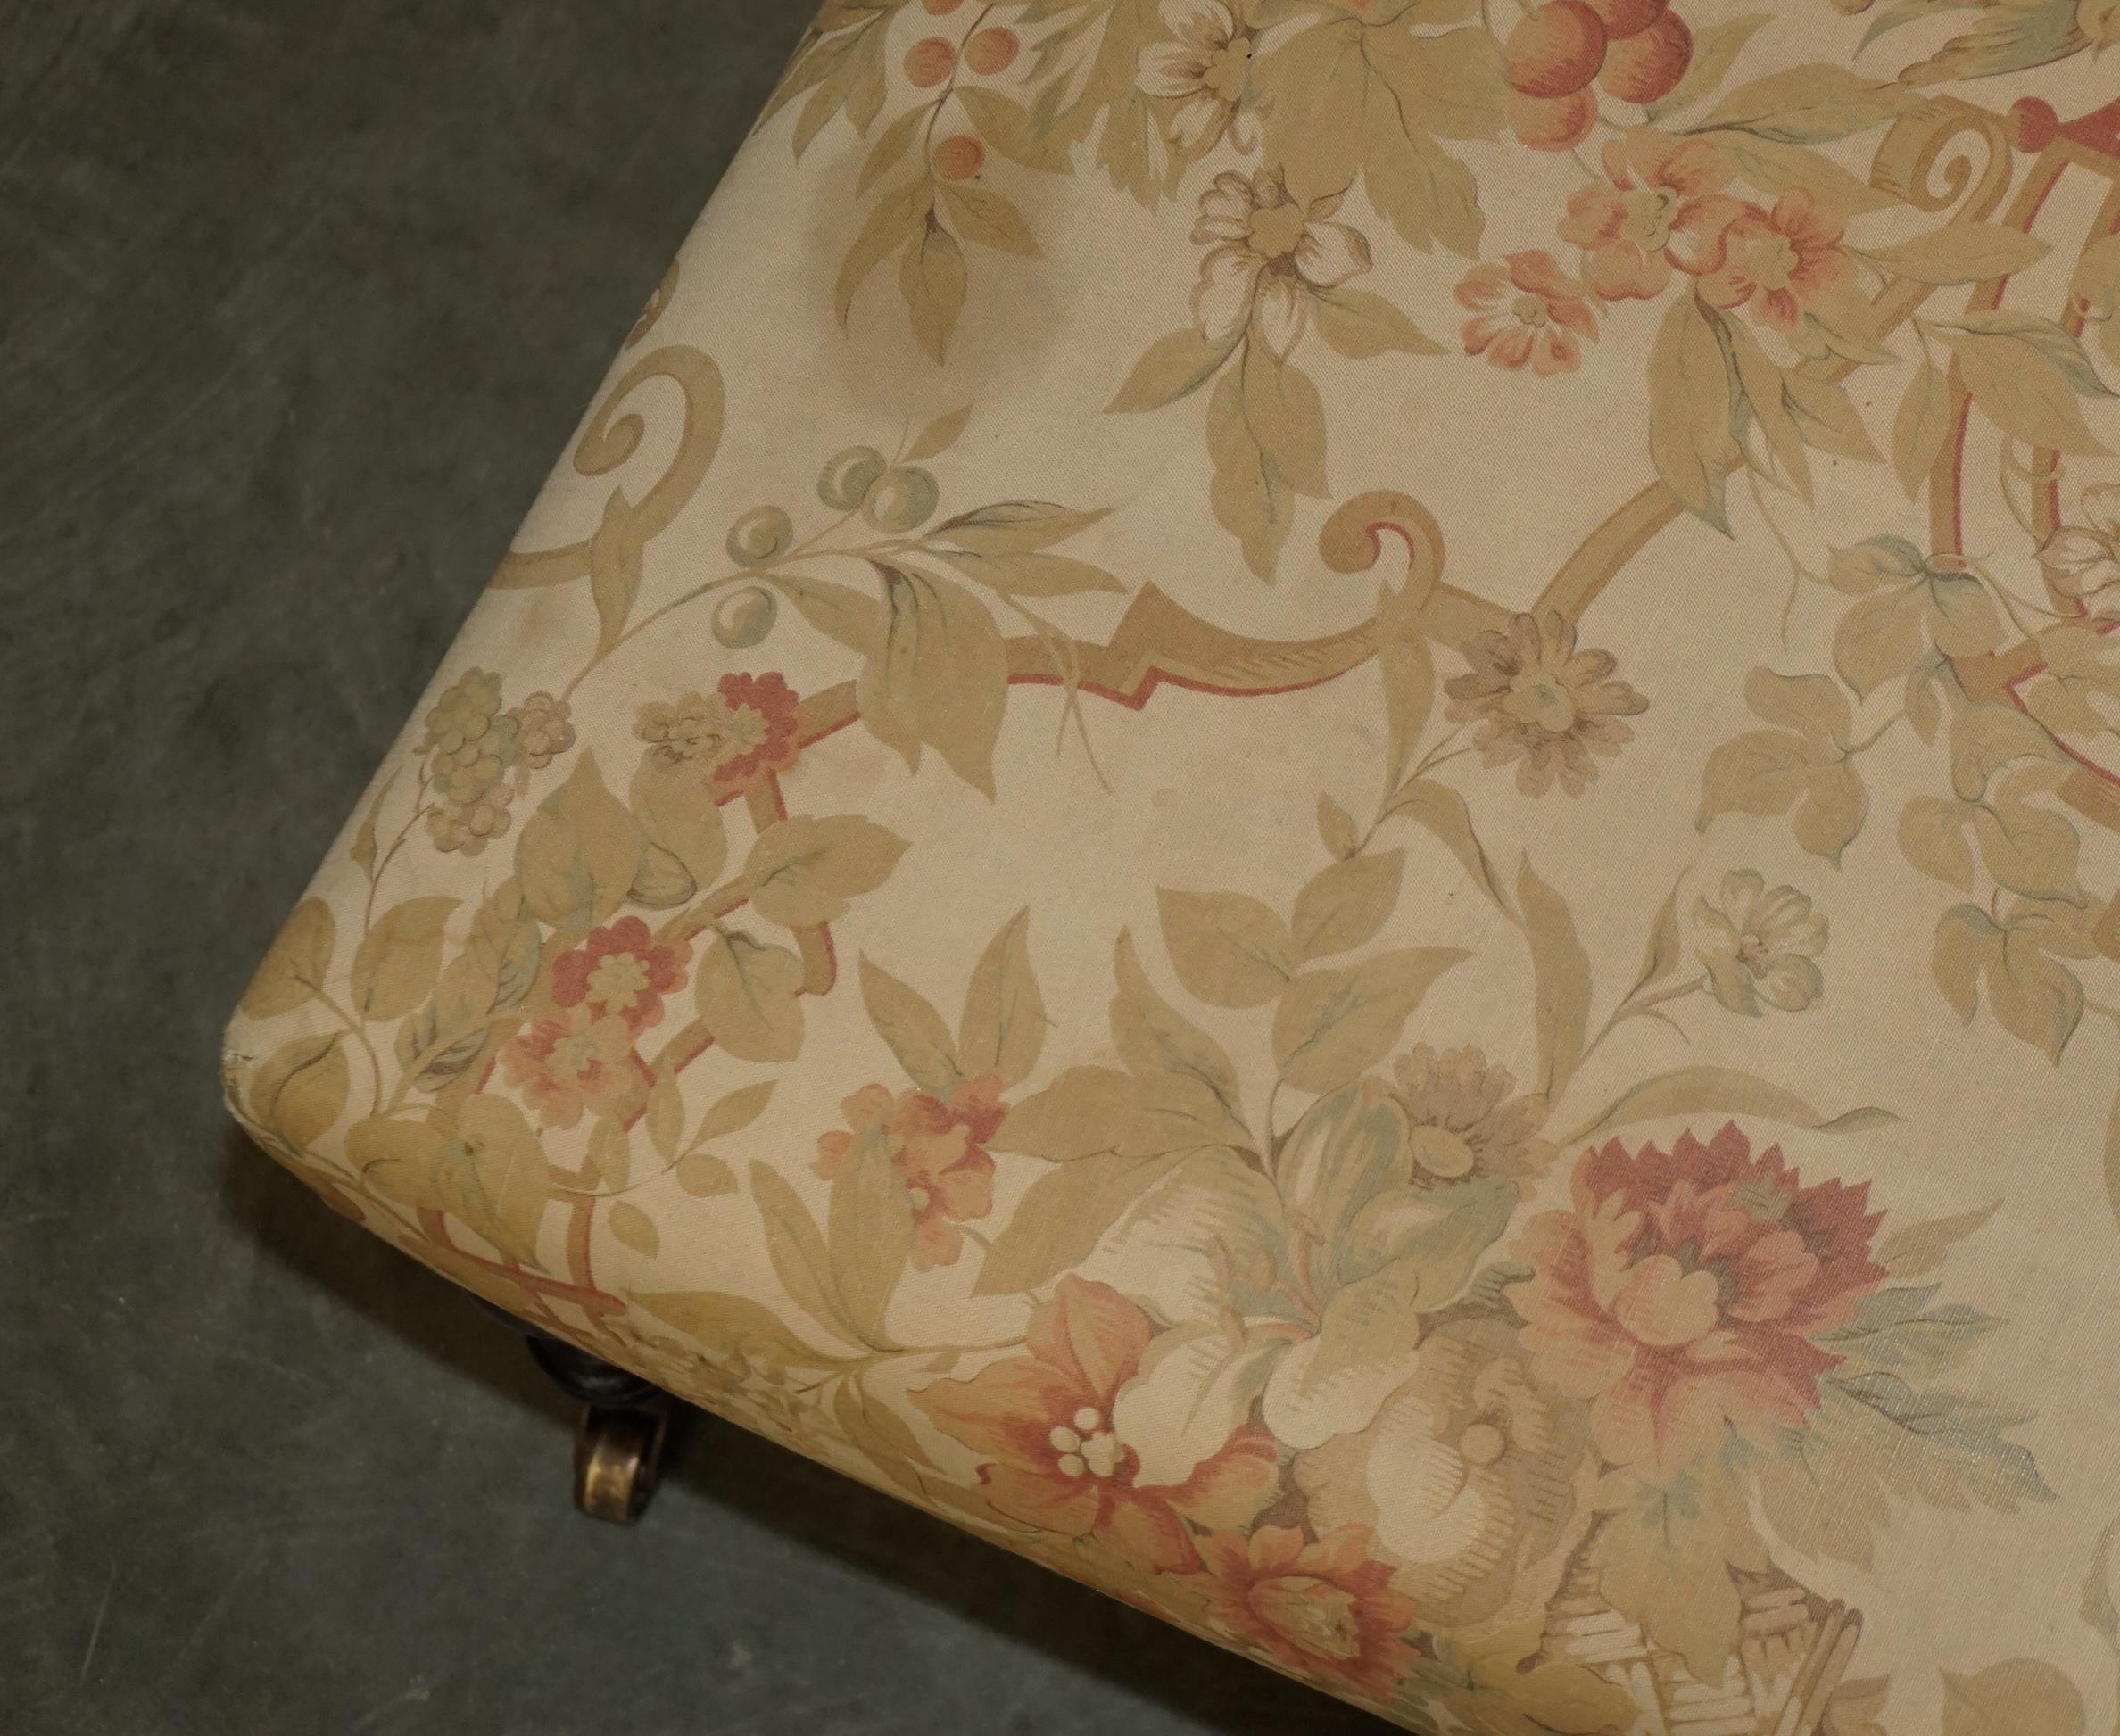 20th Century COLLECTABLE VERY LARGE ViNTAGE GEORGE SMITH CHELSEA FLORAL FOOTSTOOL OTTOMAN For Sale